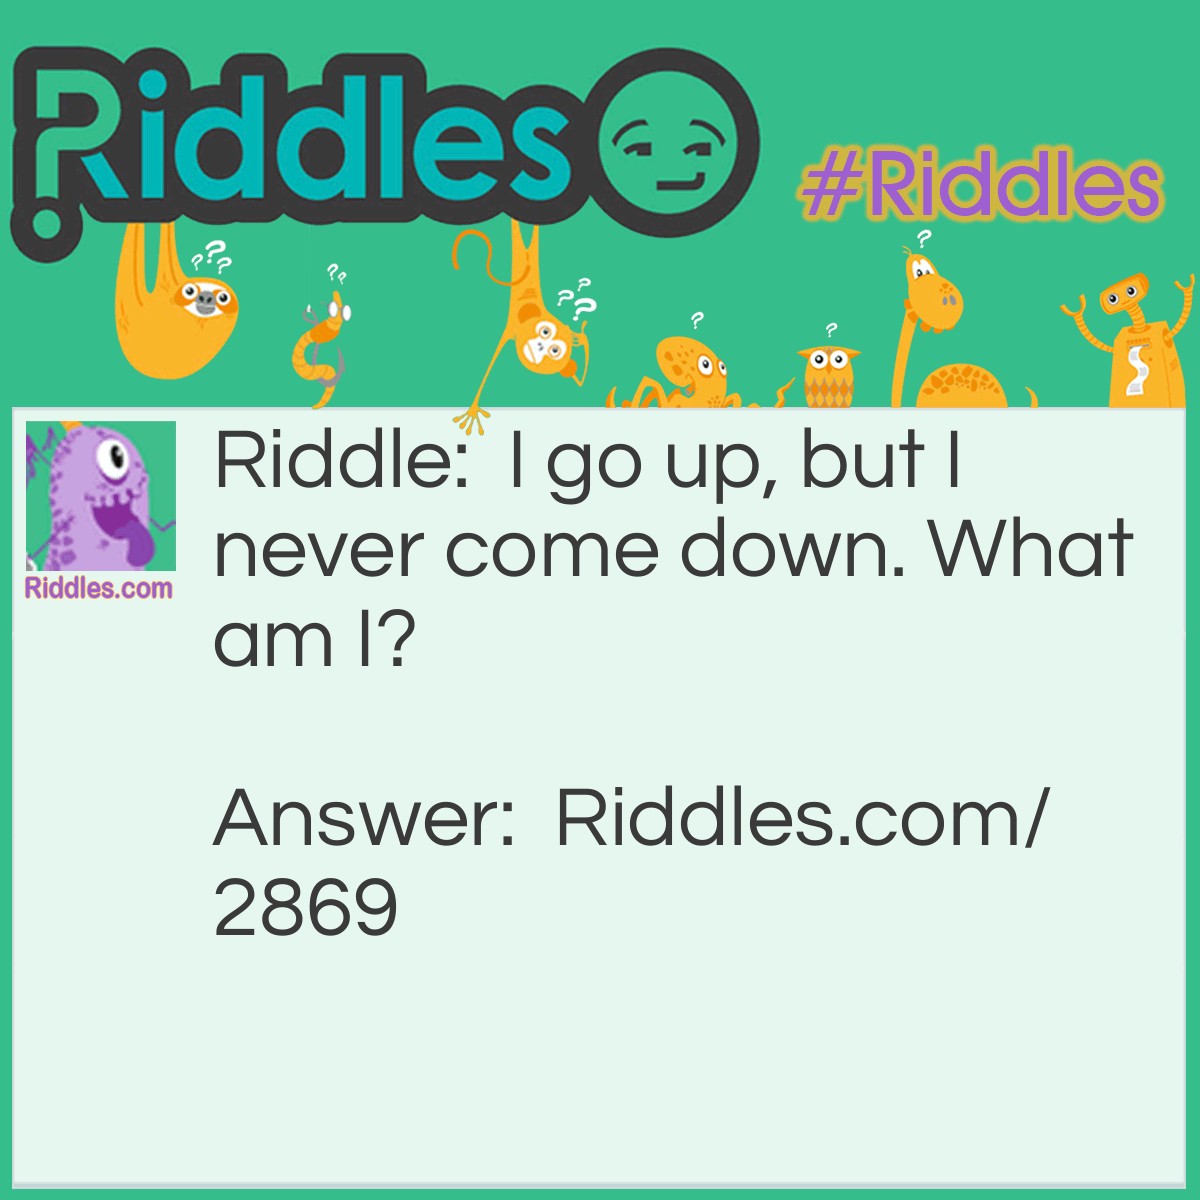 Riddle: I go up, but I never come down. What am I? Answer: Your age!